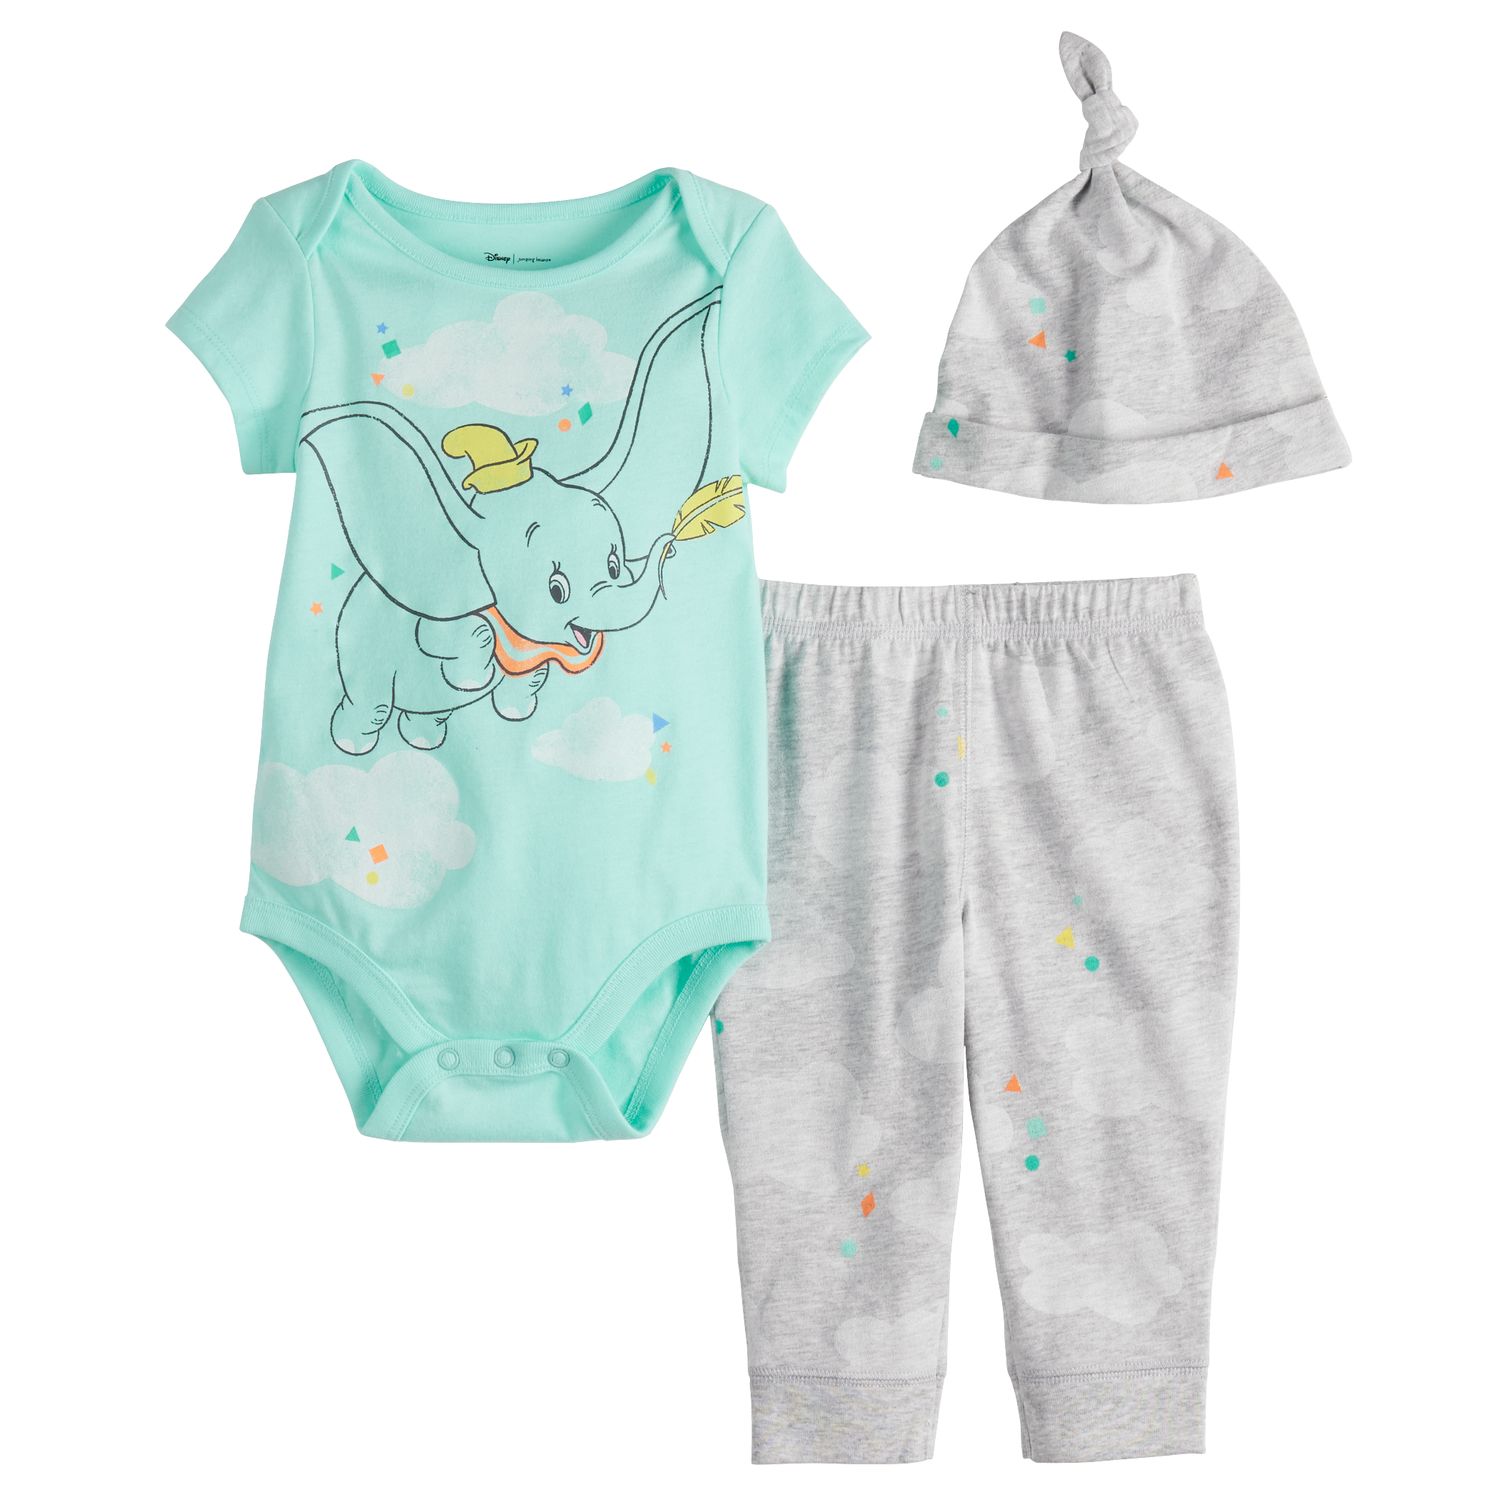 dumbo newborn outfit